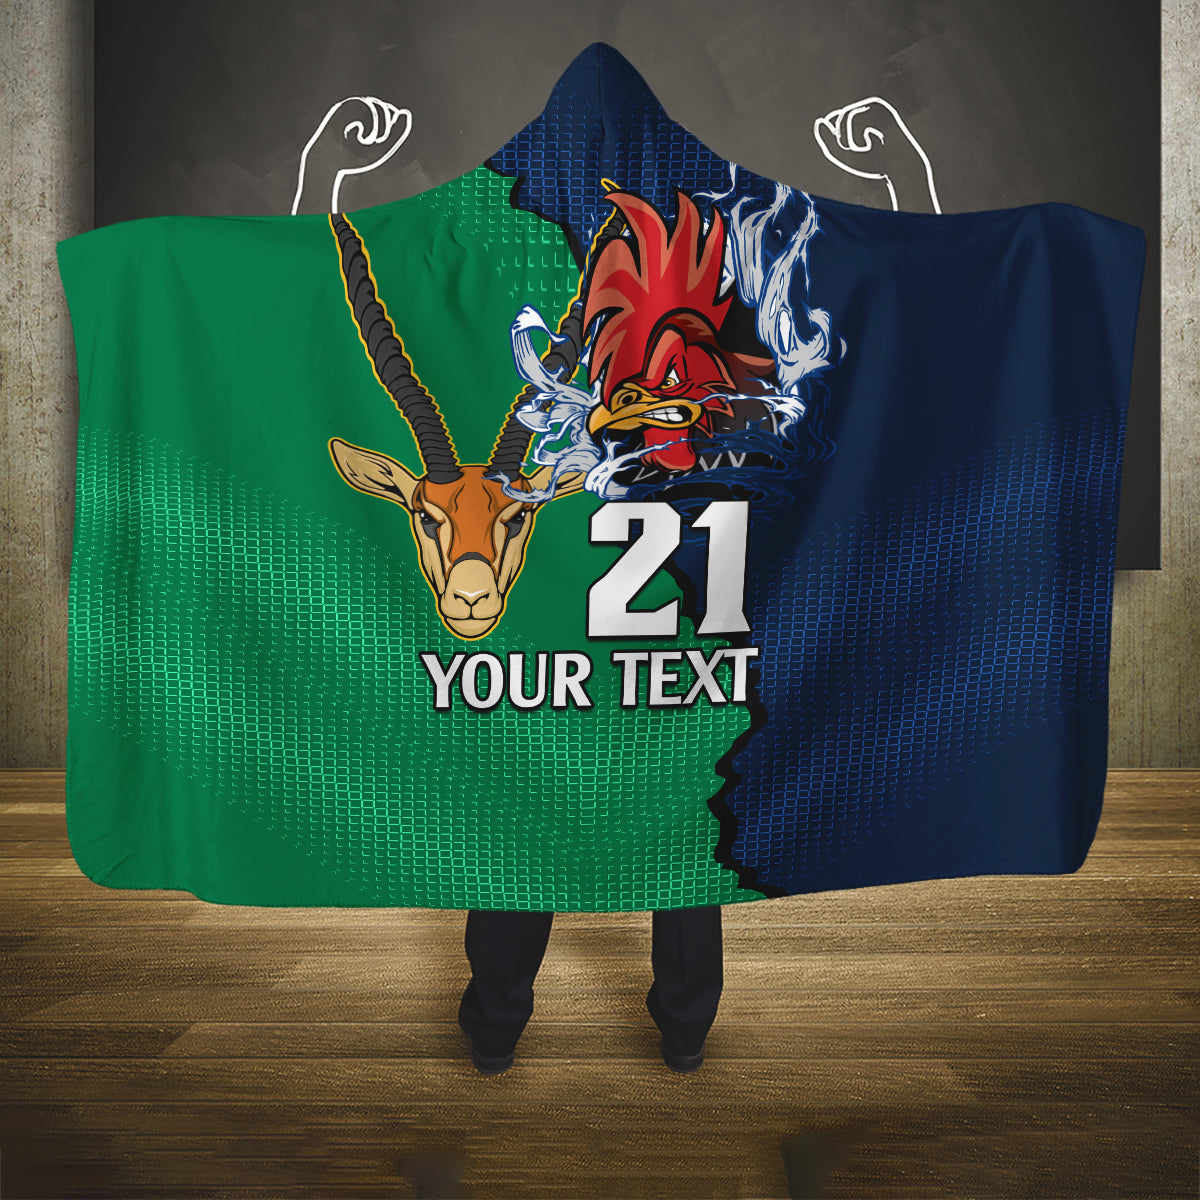 custom-france-south-africa-rugby-hooded-blanket-springboks-and-gallic-rooster-world-cup-2023